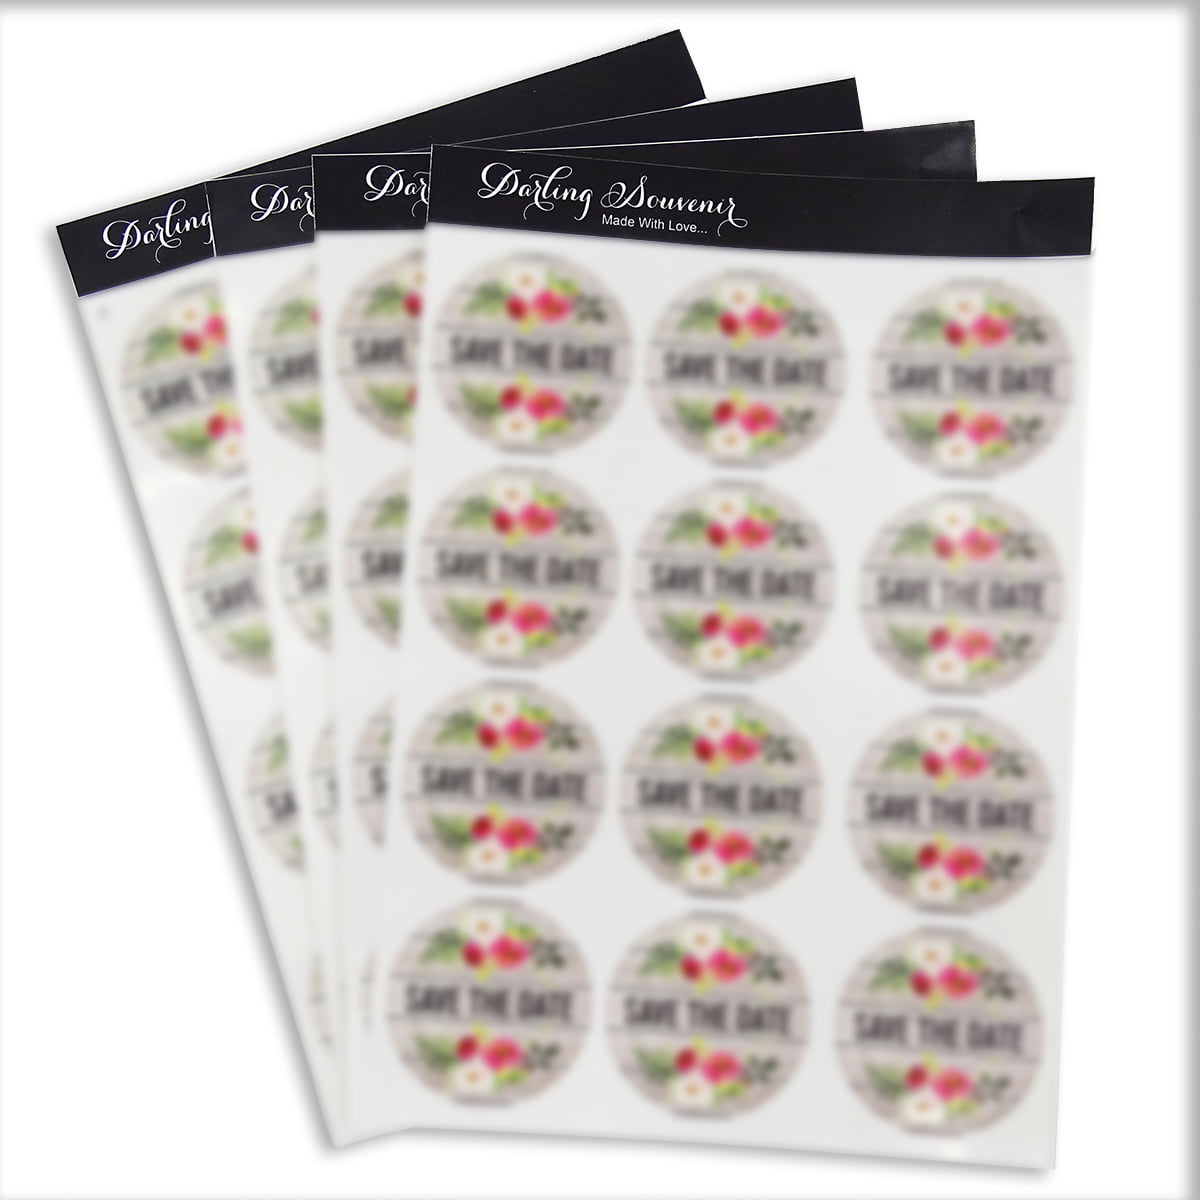 Darling Souvenir Round Glitter Background Save The Date Stickers 1.6 Inches  Envelope Seals-45 Pcs